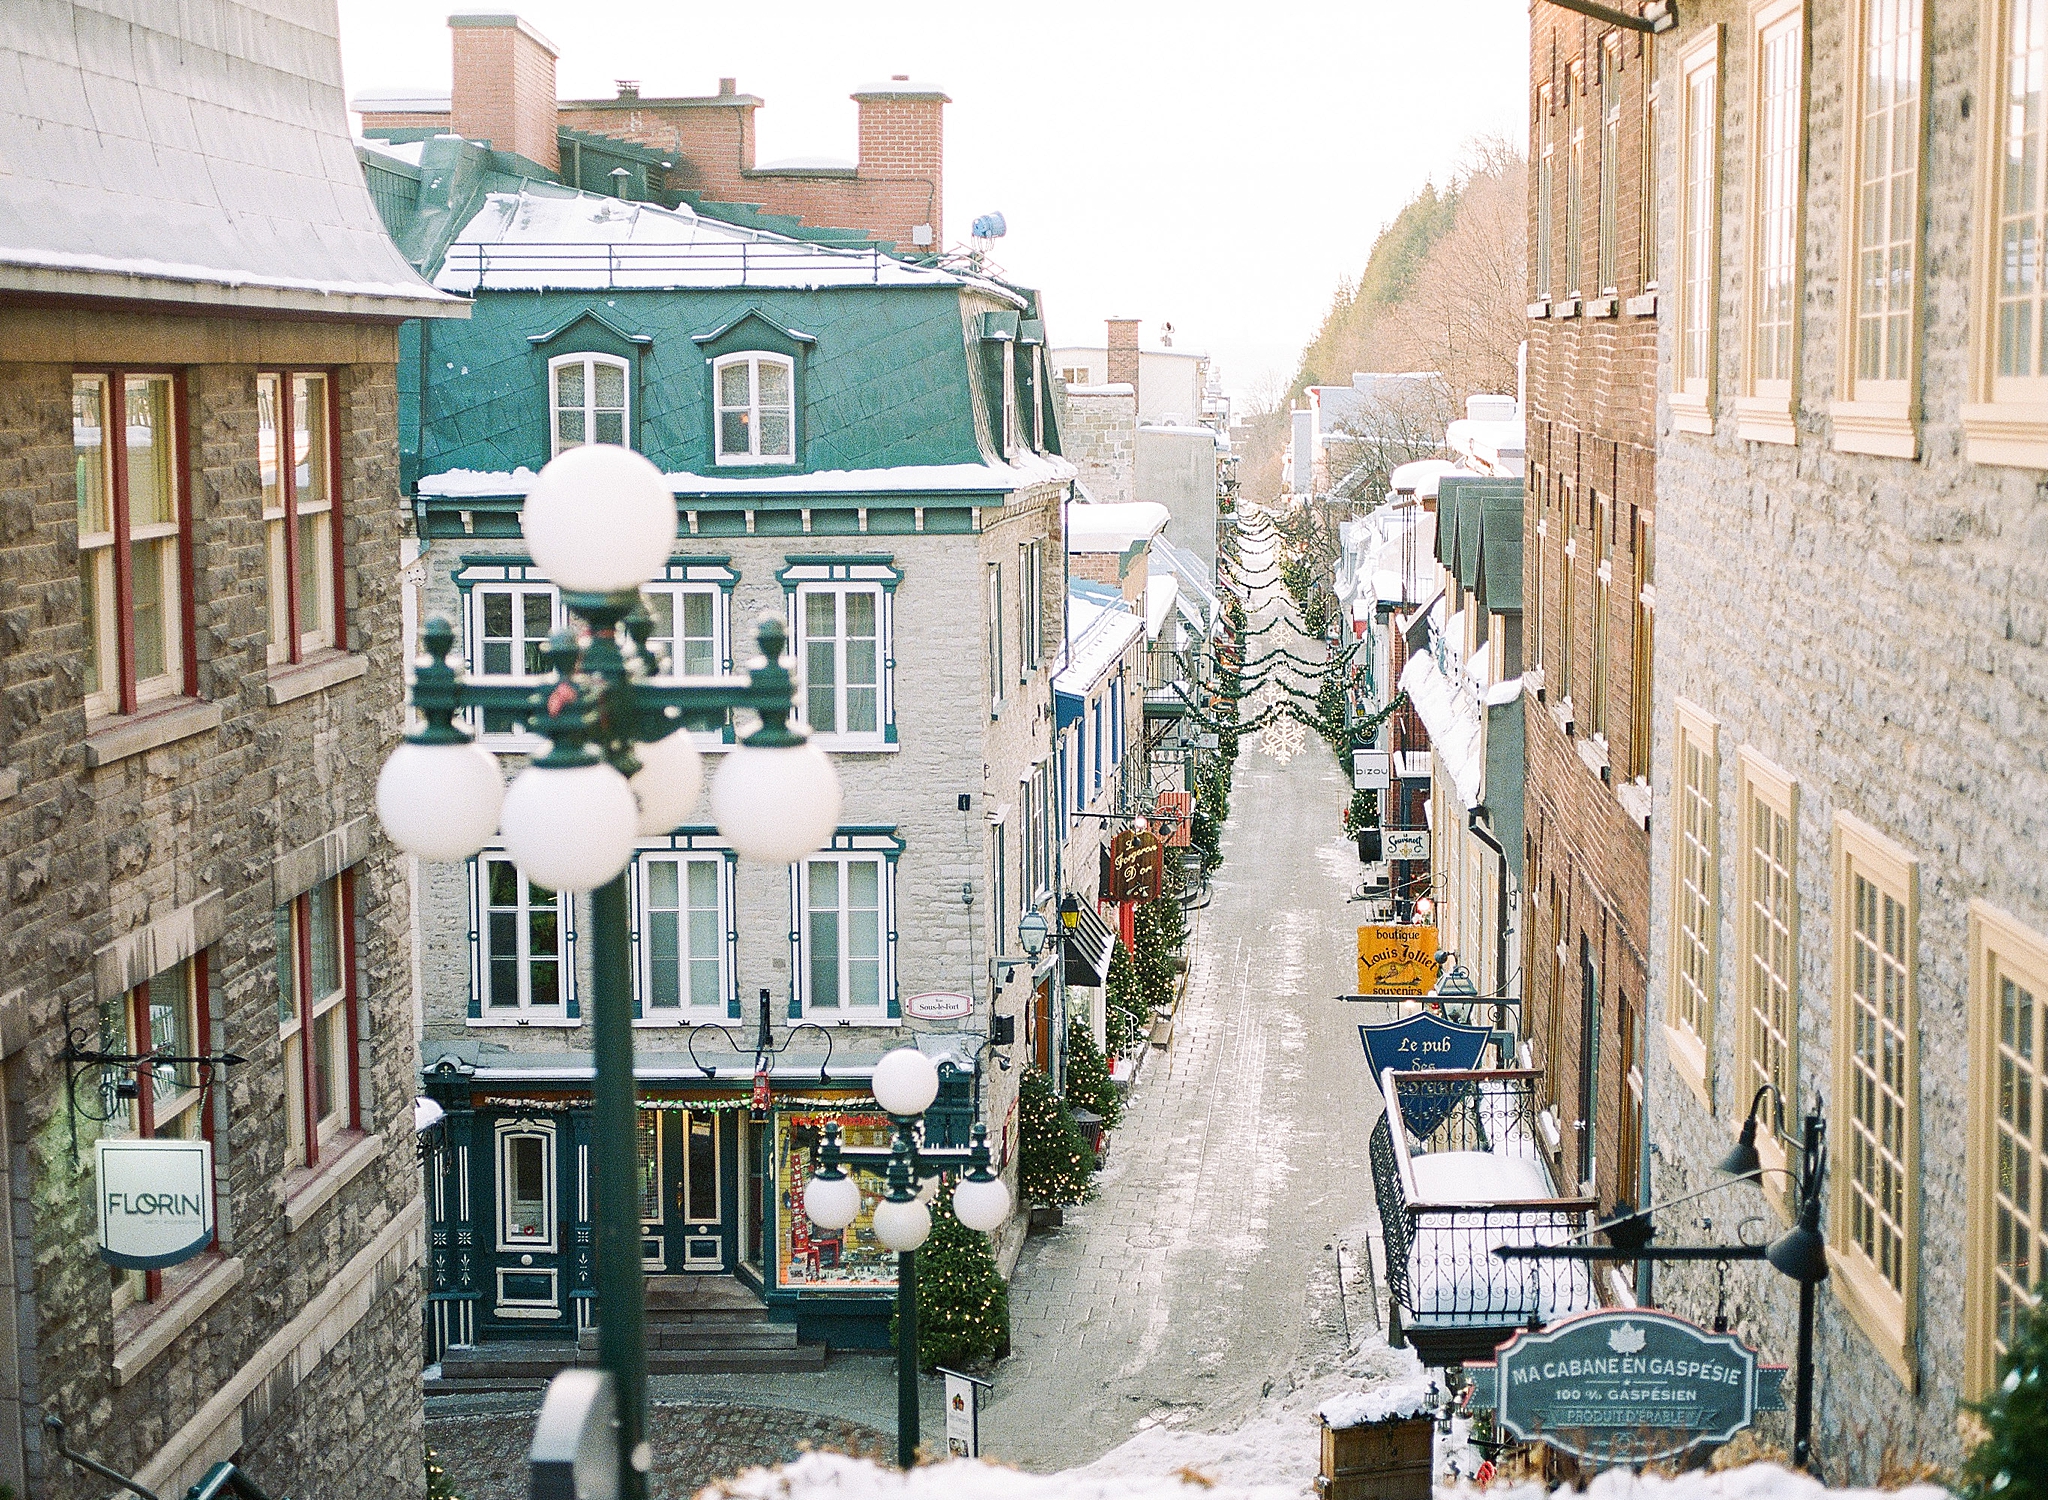 This Washington, DC wedding photographer travels to Quebec City, Canada and photographs the iconic town on film.